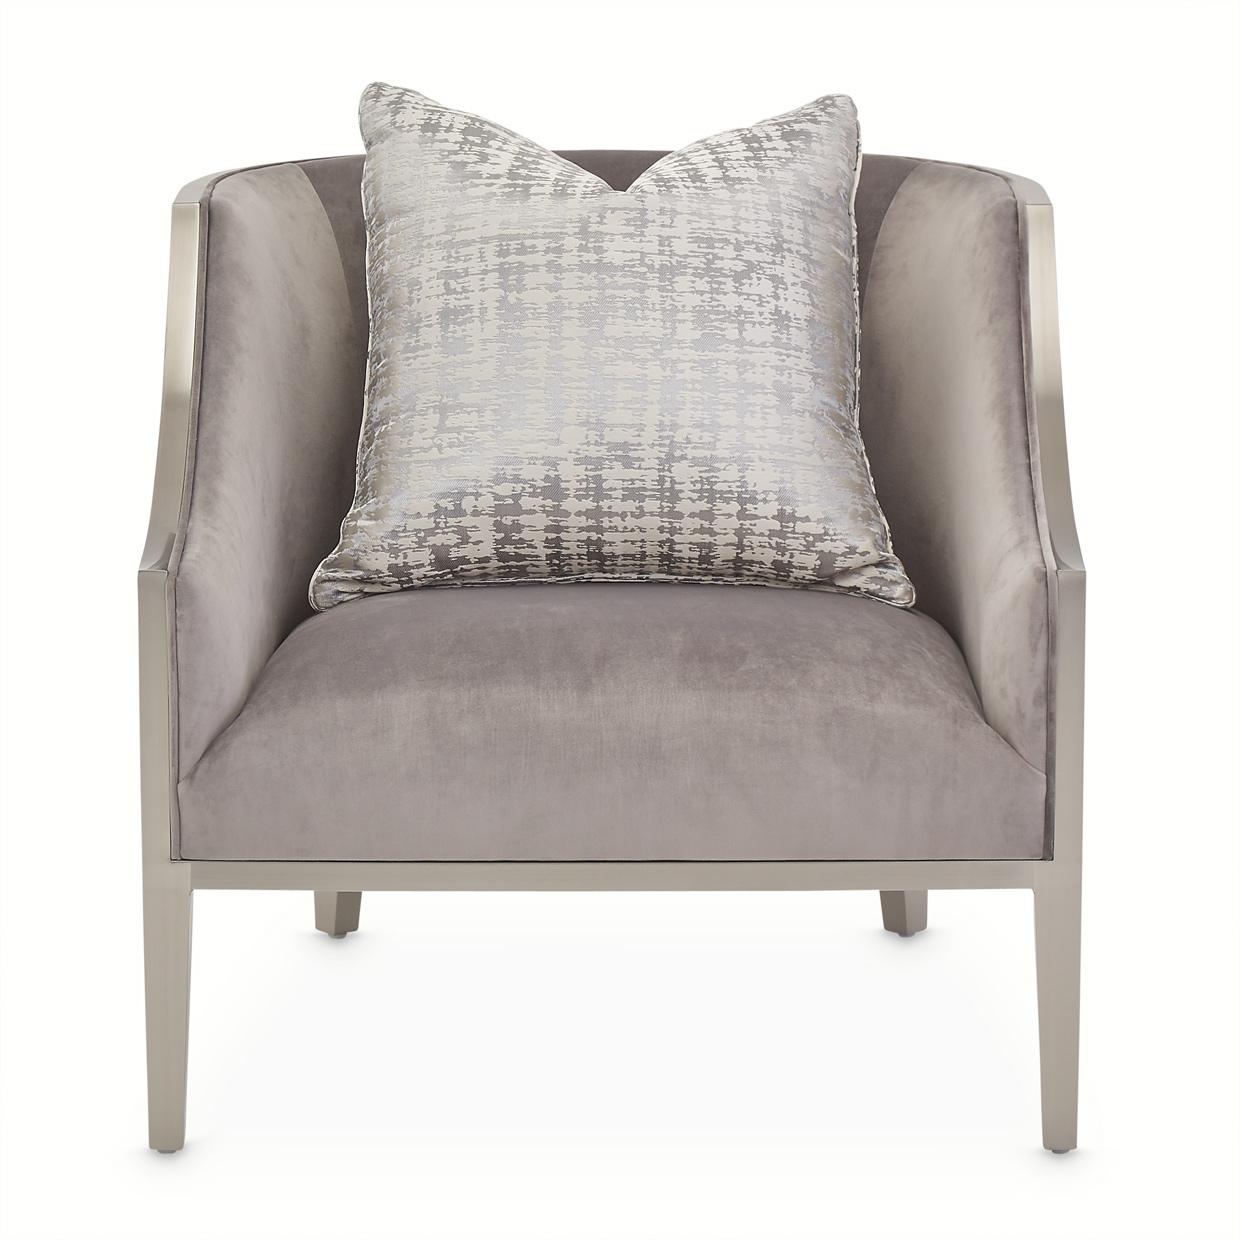 Roxbury Park Accent Chair in Slate